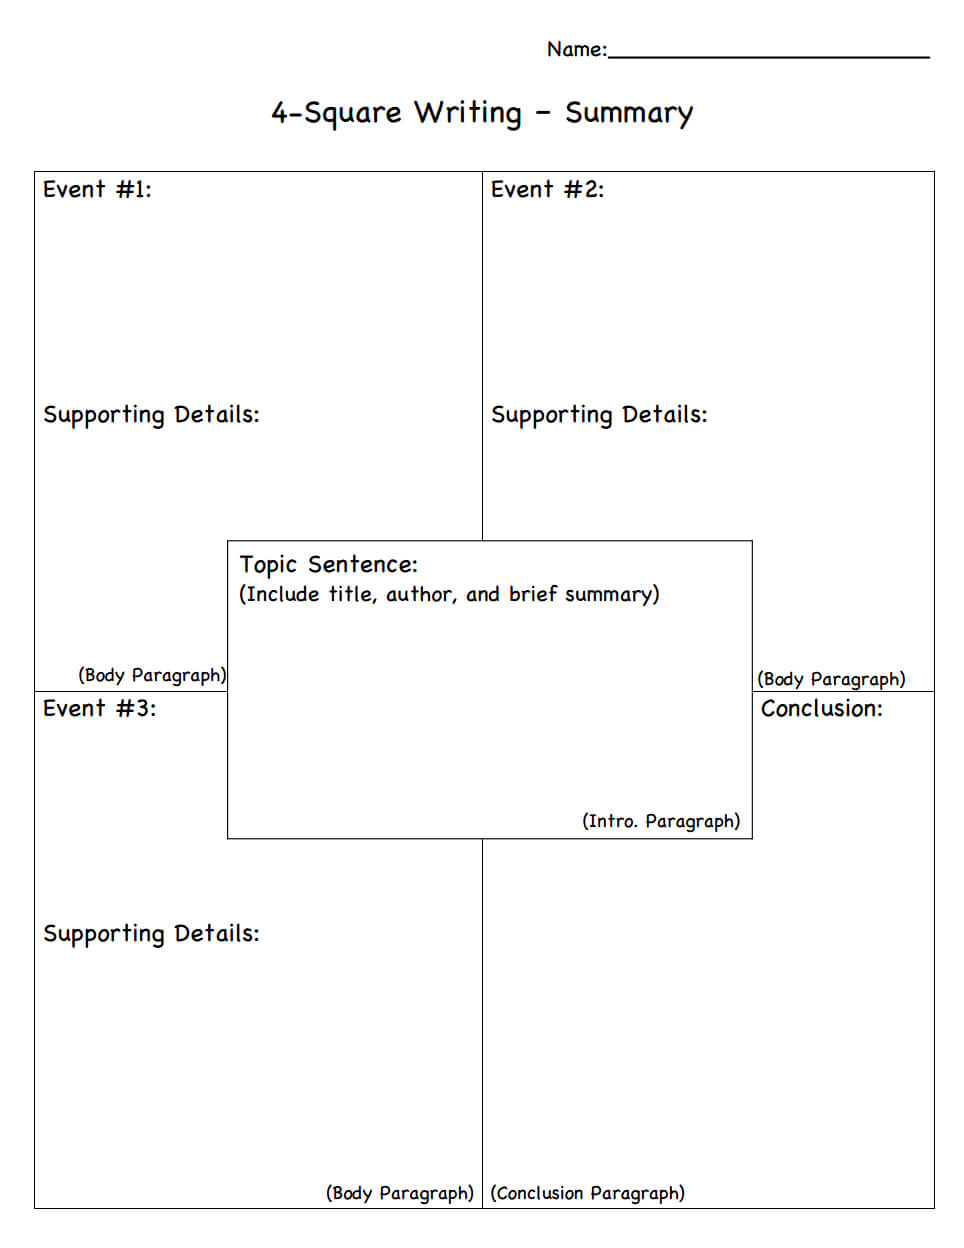 4 Square Writing Summary | Summary Writing, Third Grade Intended For Blank Four Square Writing Template